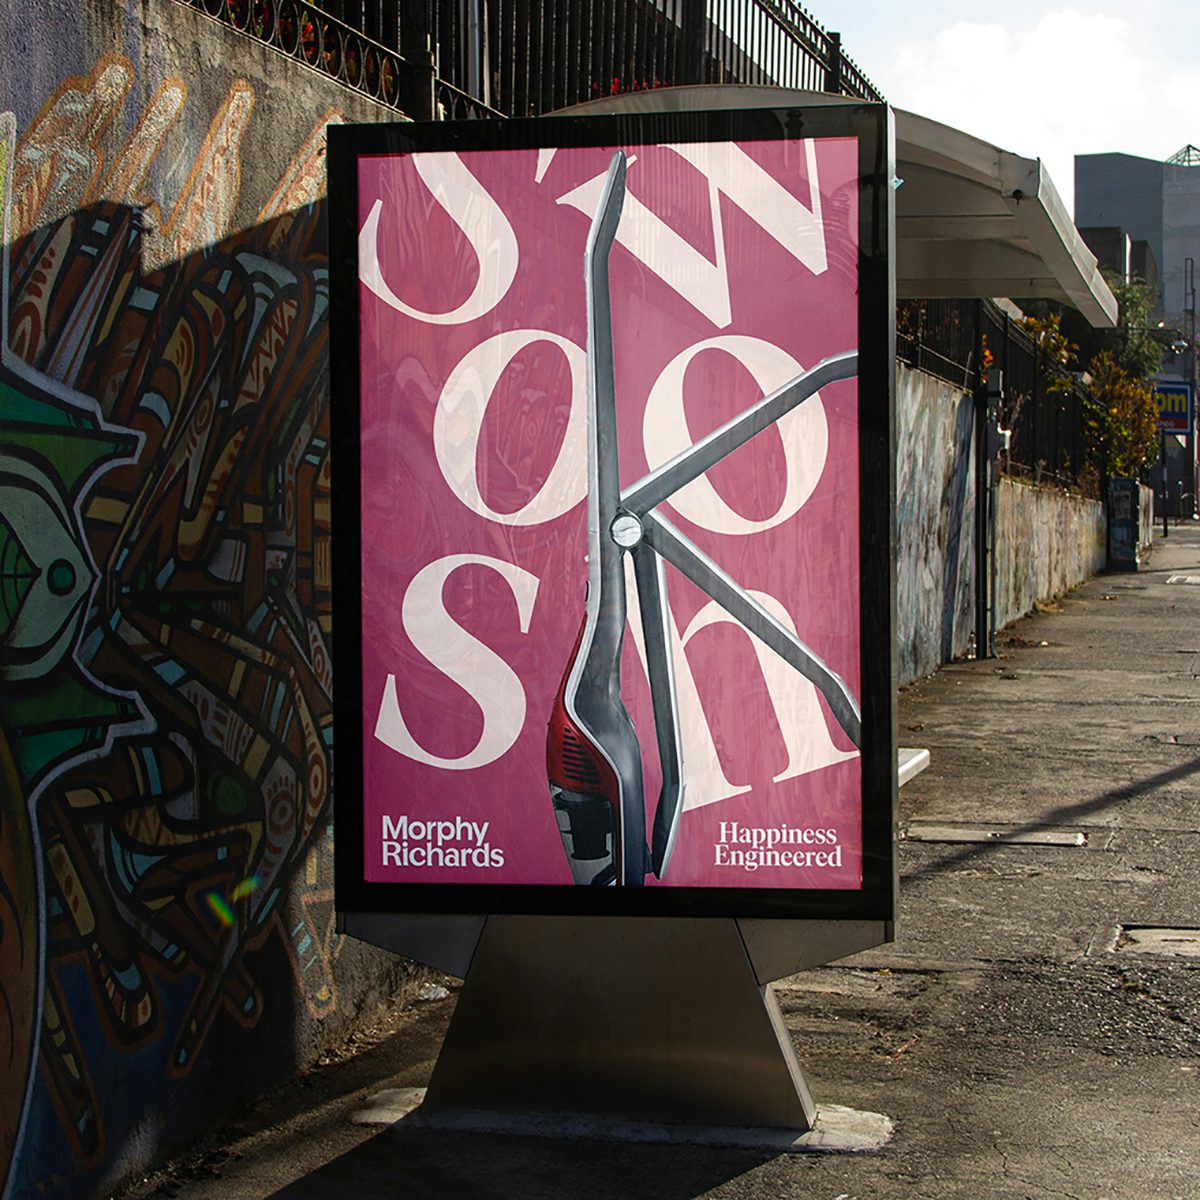 Photograph of an outdoor Morphy Richards advertisement featuring brand identity design by Otherway